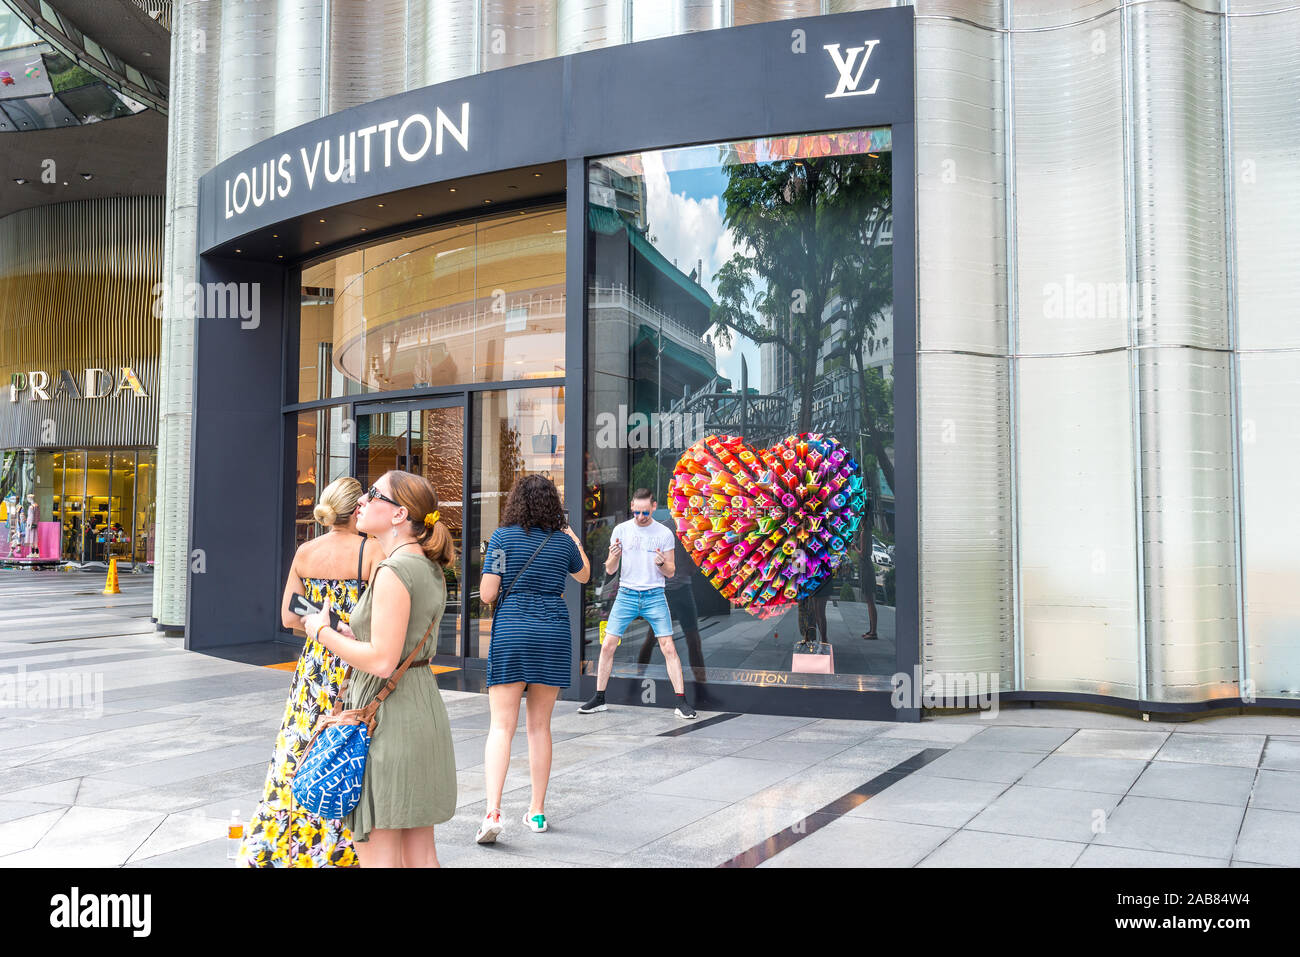 Louis Vuitton, #LV Showroom, Orchard Road Singapore – The